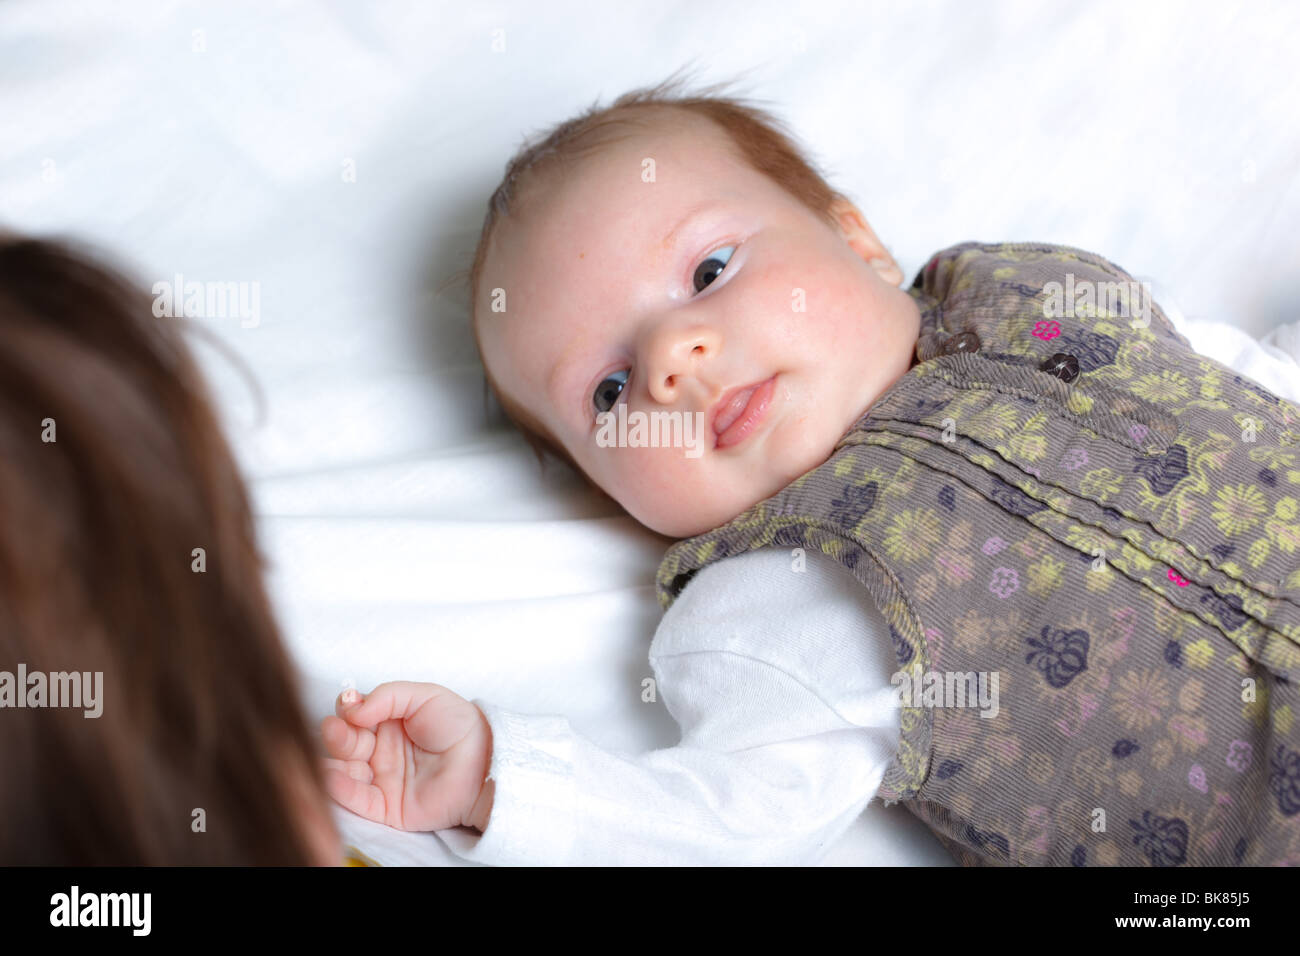 A nice small baby curiously looking around Stock Photo